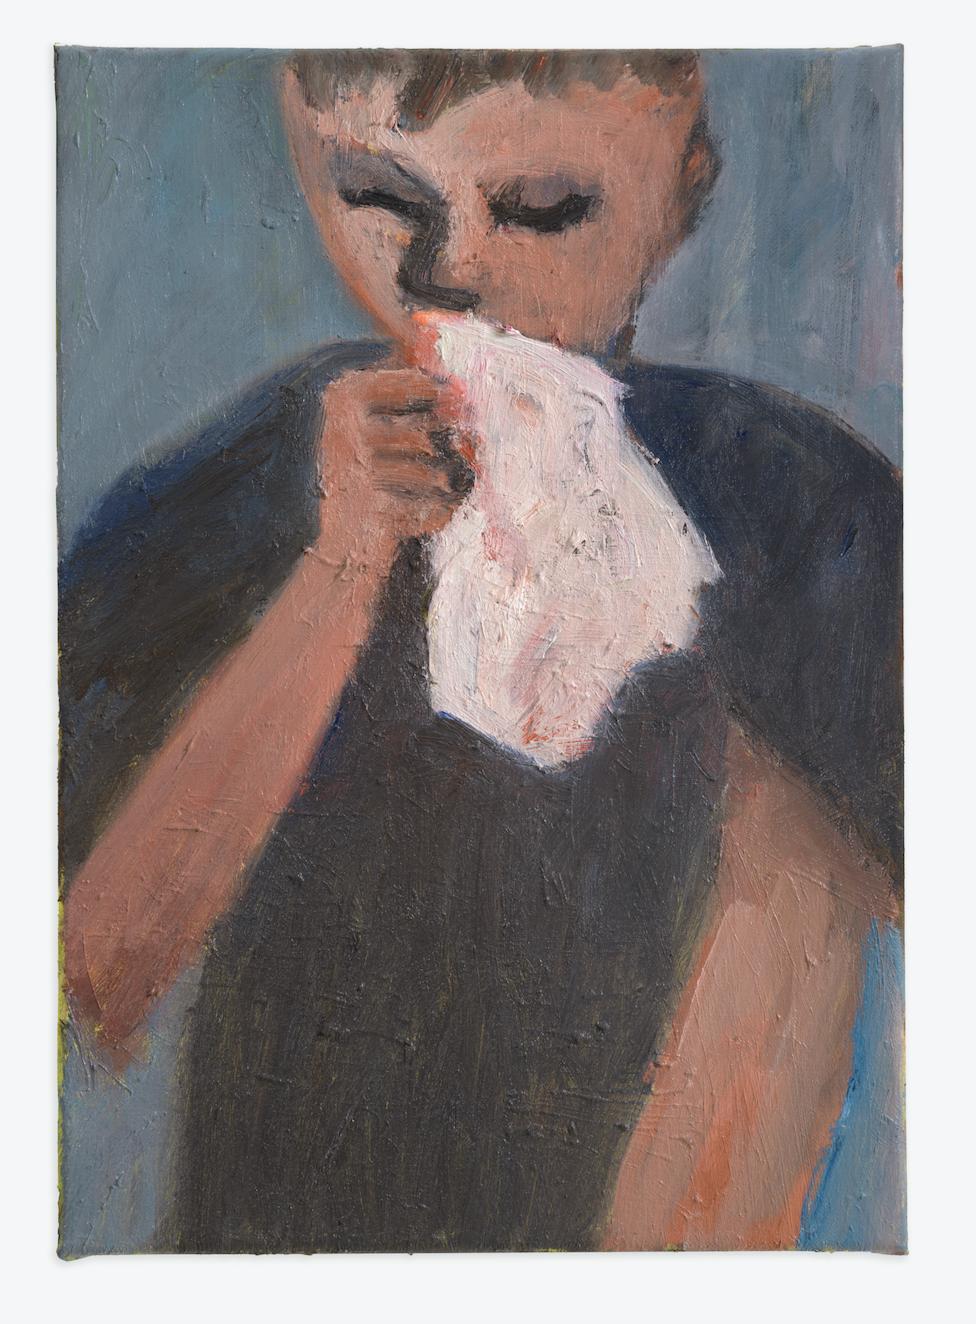 Portrait of the artist with nosebleed by Paul Housley